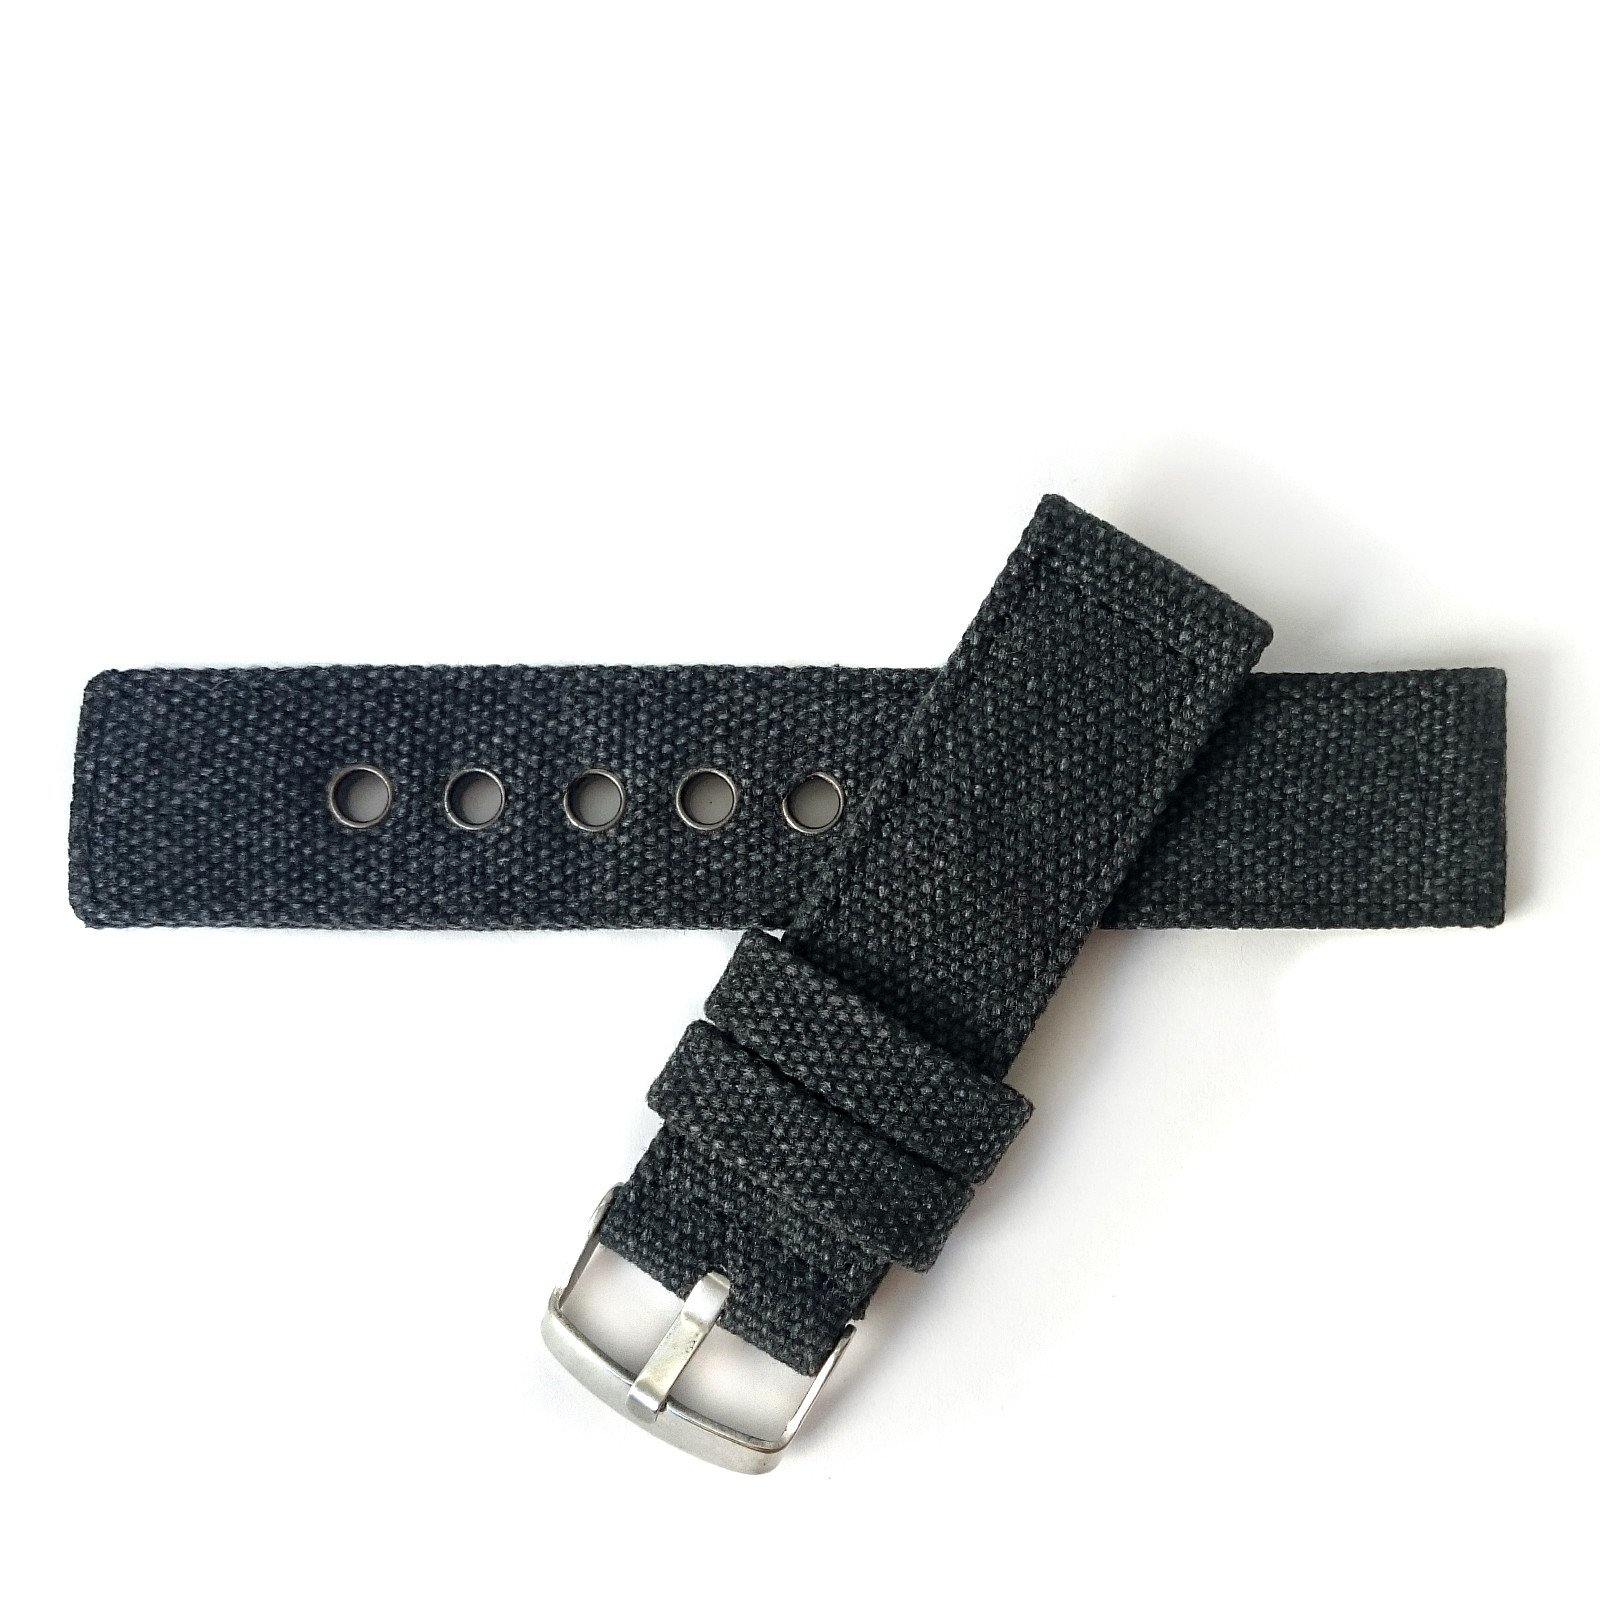 Rugged Charcoal Black Stitched Canvas Watch Strap